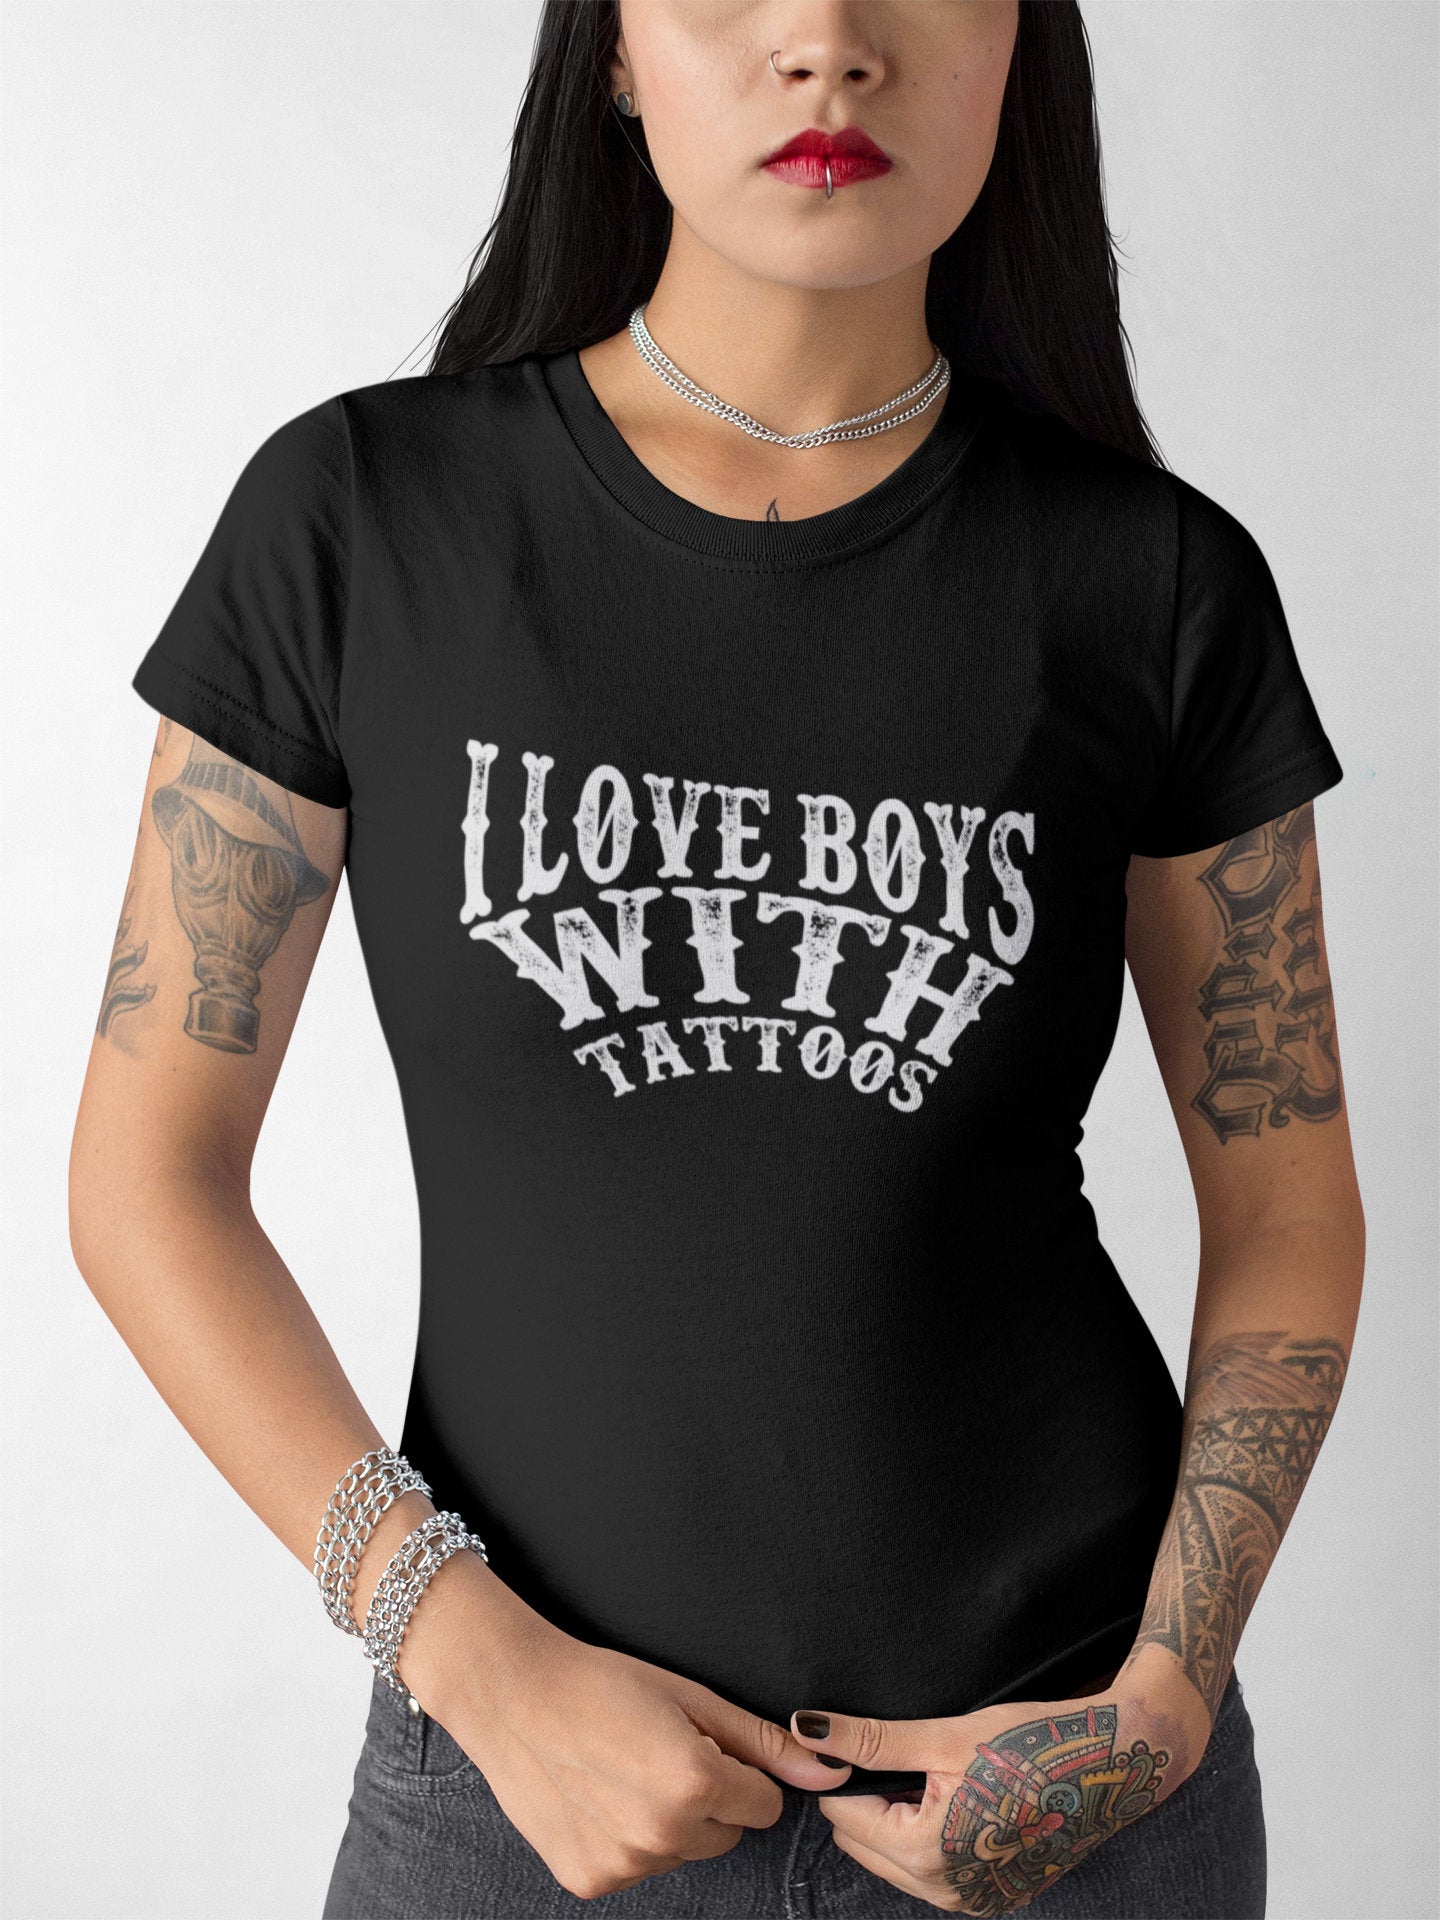 I Love Boys With Tattoos T-Shirt - Great Gift for Tattoo Enthusiasts